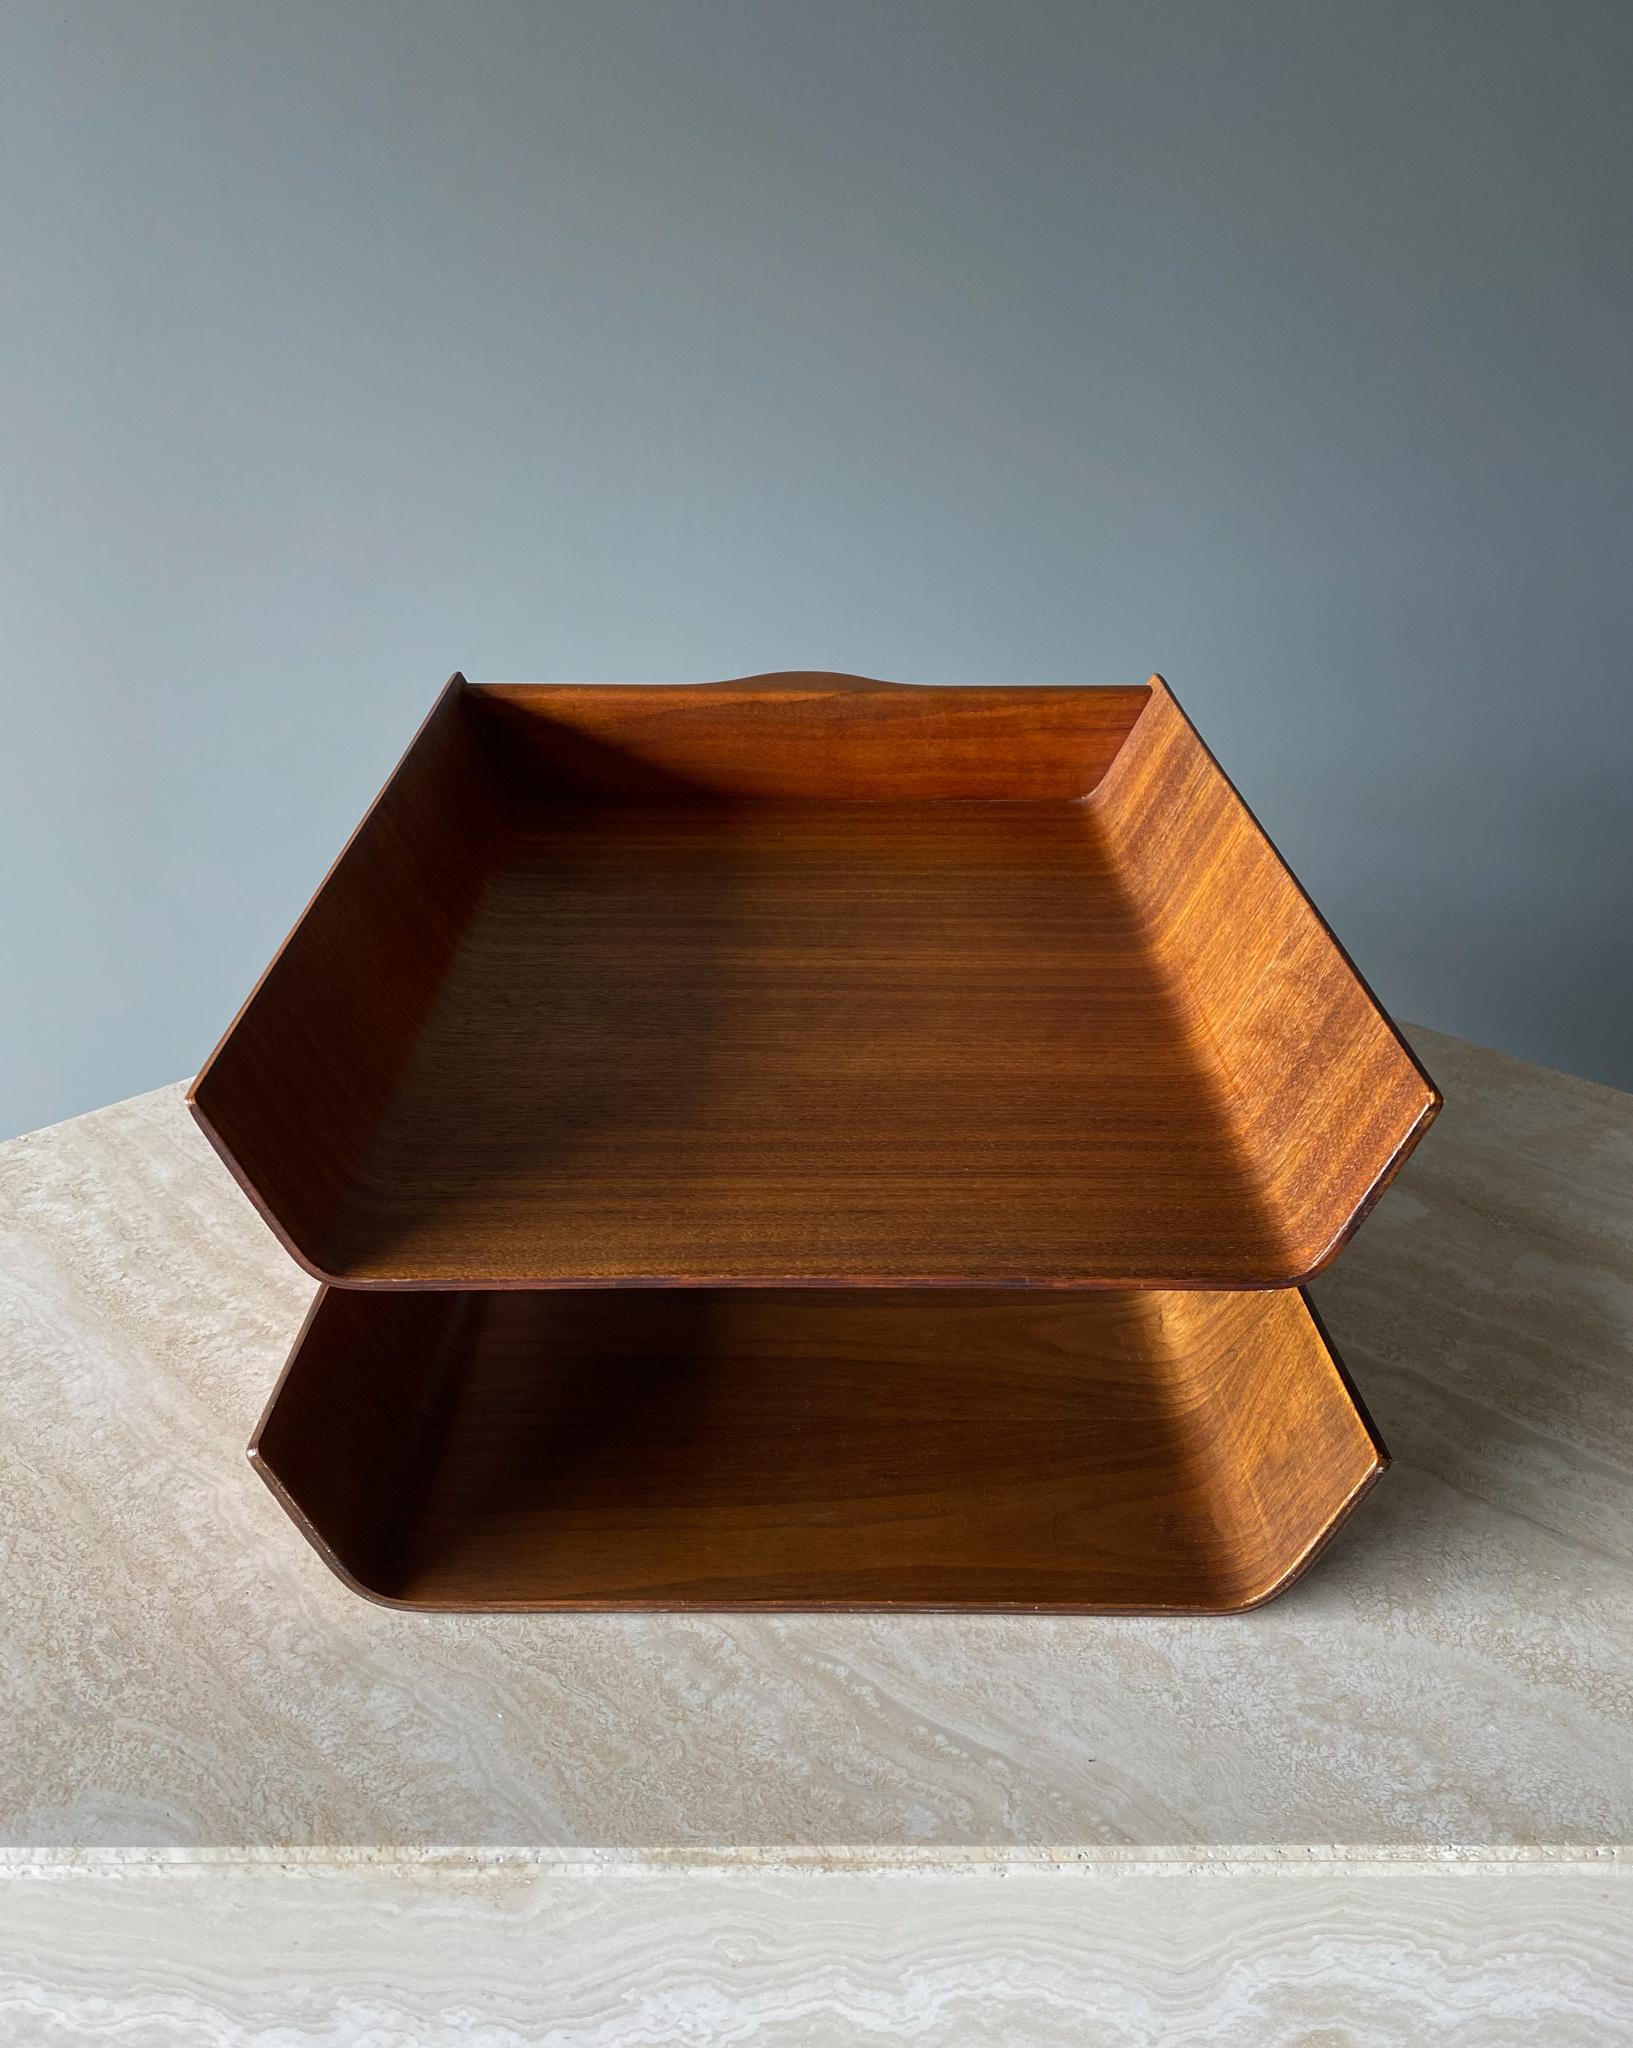 Florence Knoll molded plywood architectural letter tray, 1960s. This piece retains its original label to the bottom letter tray.